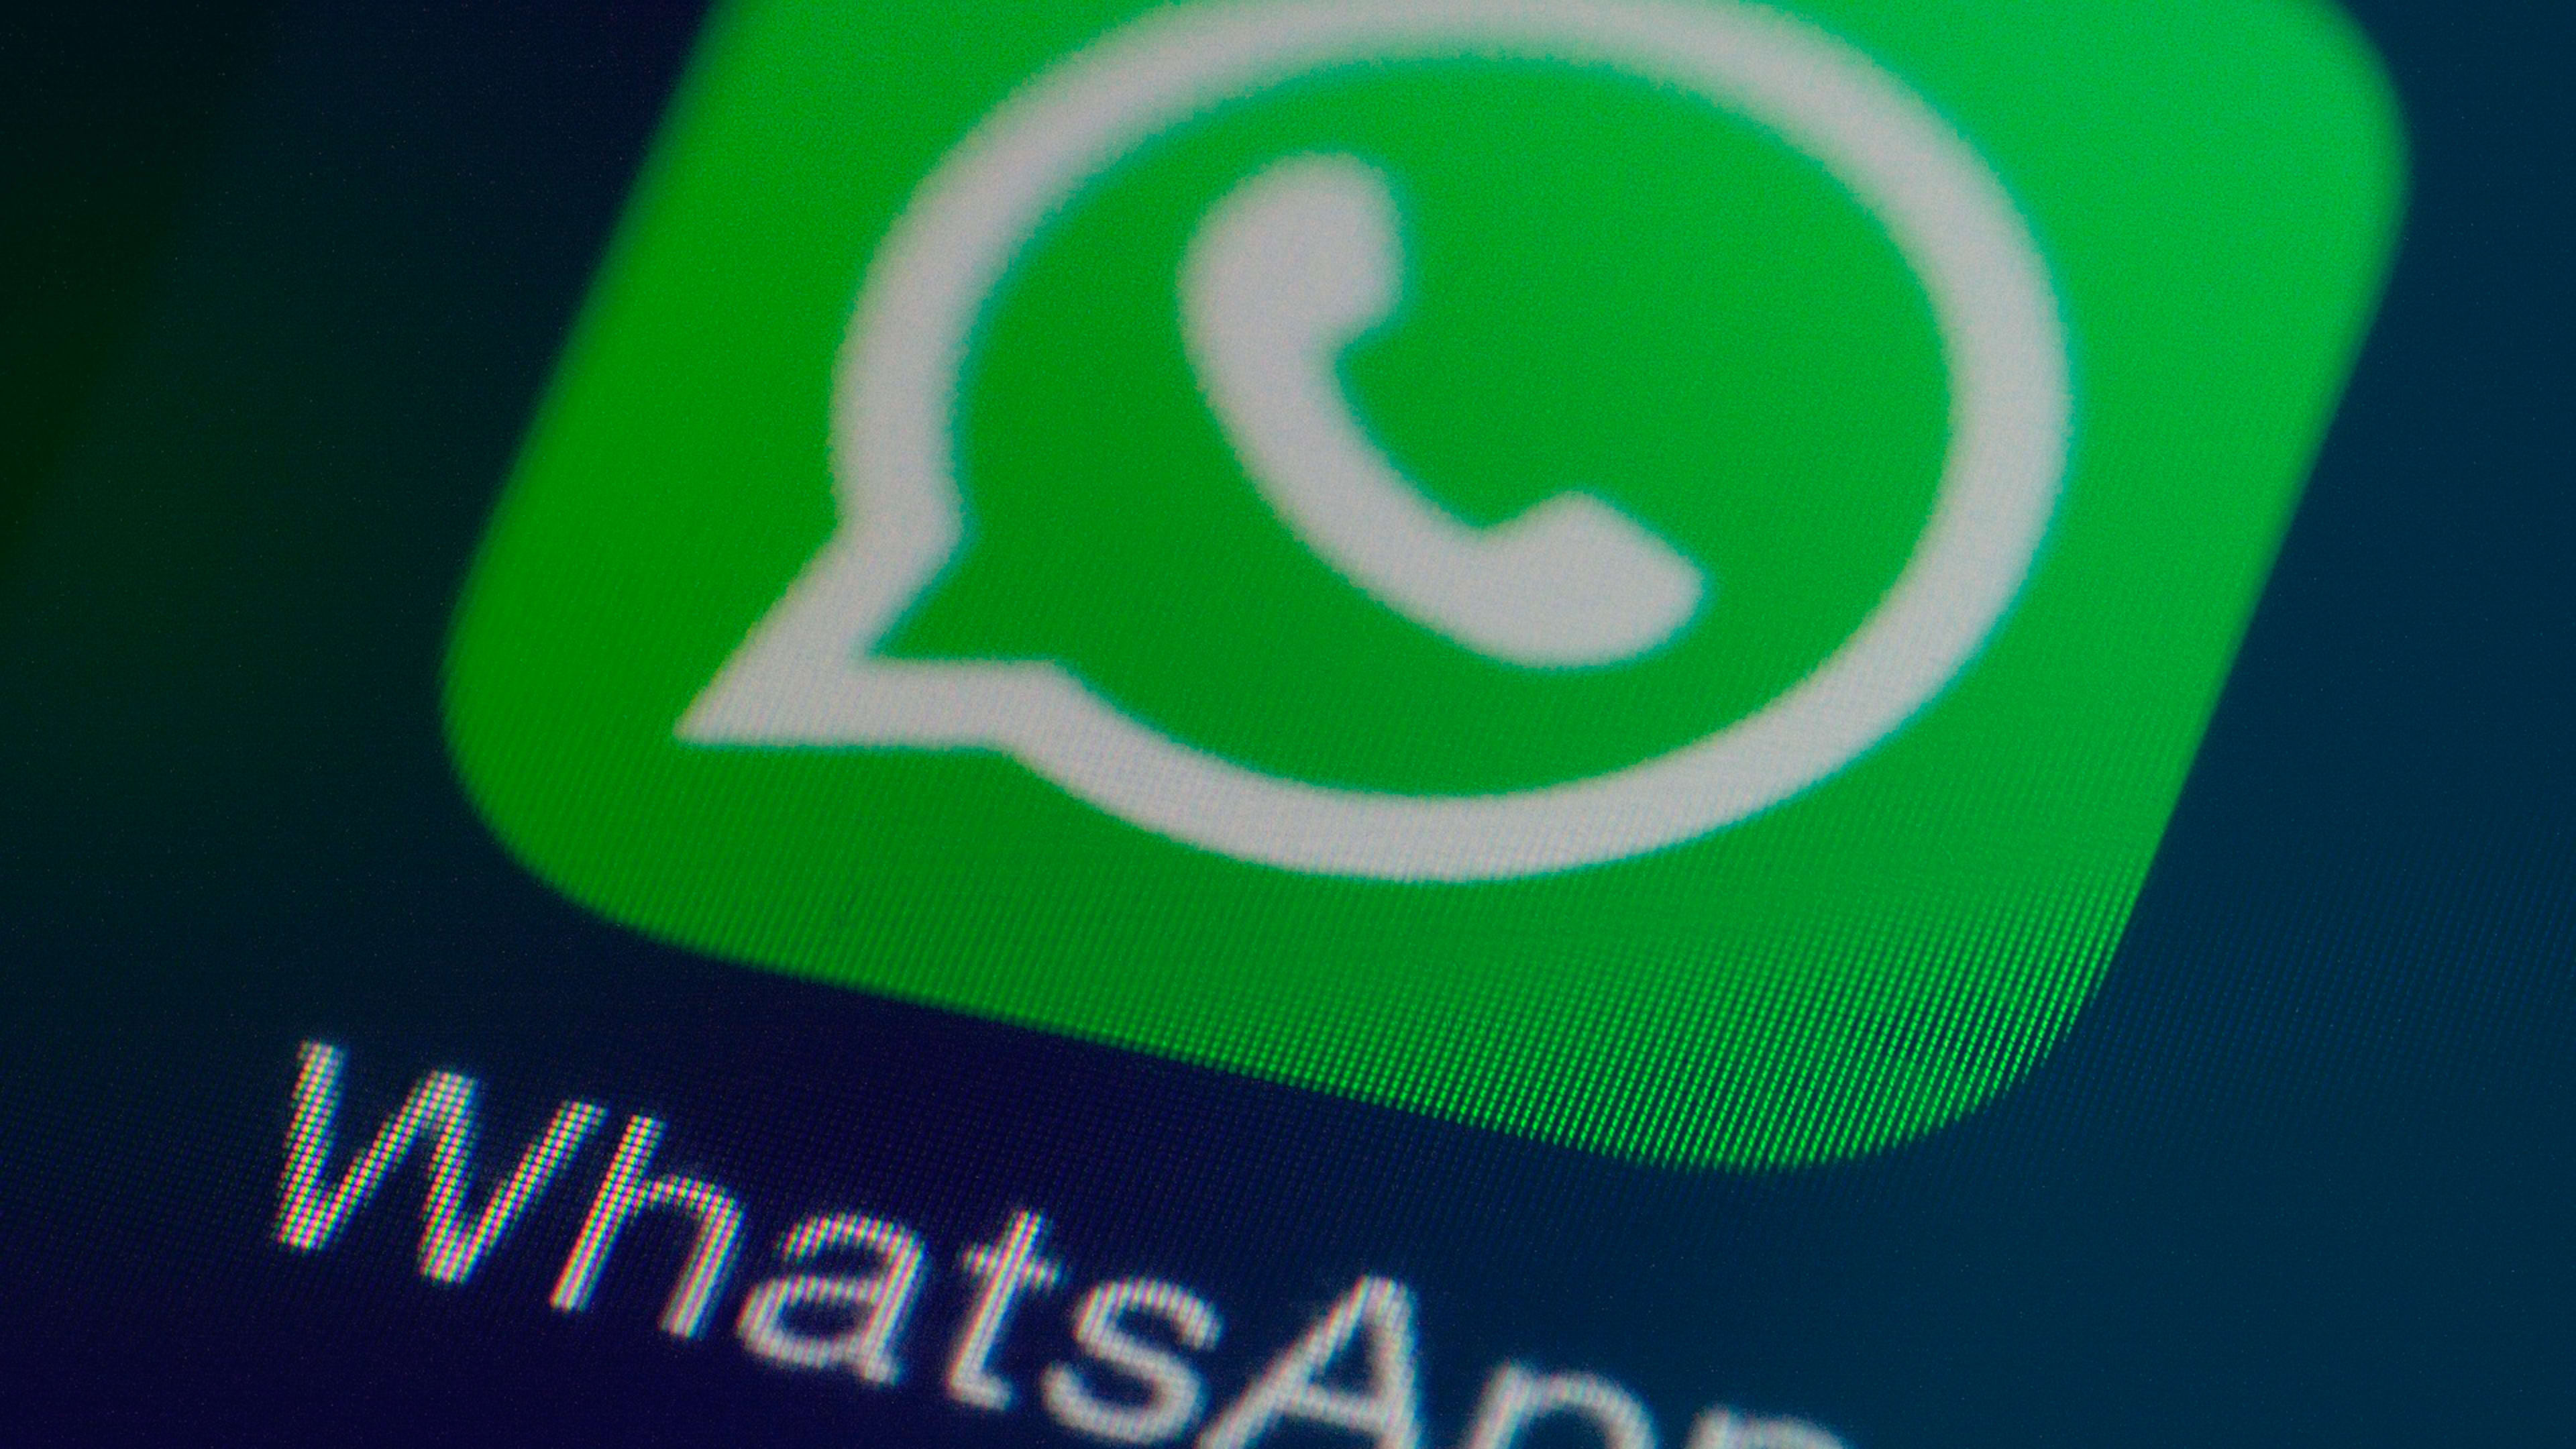 WhatsApp will reportedly develop tools to combat fake news in India